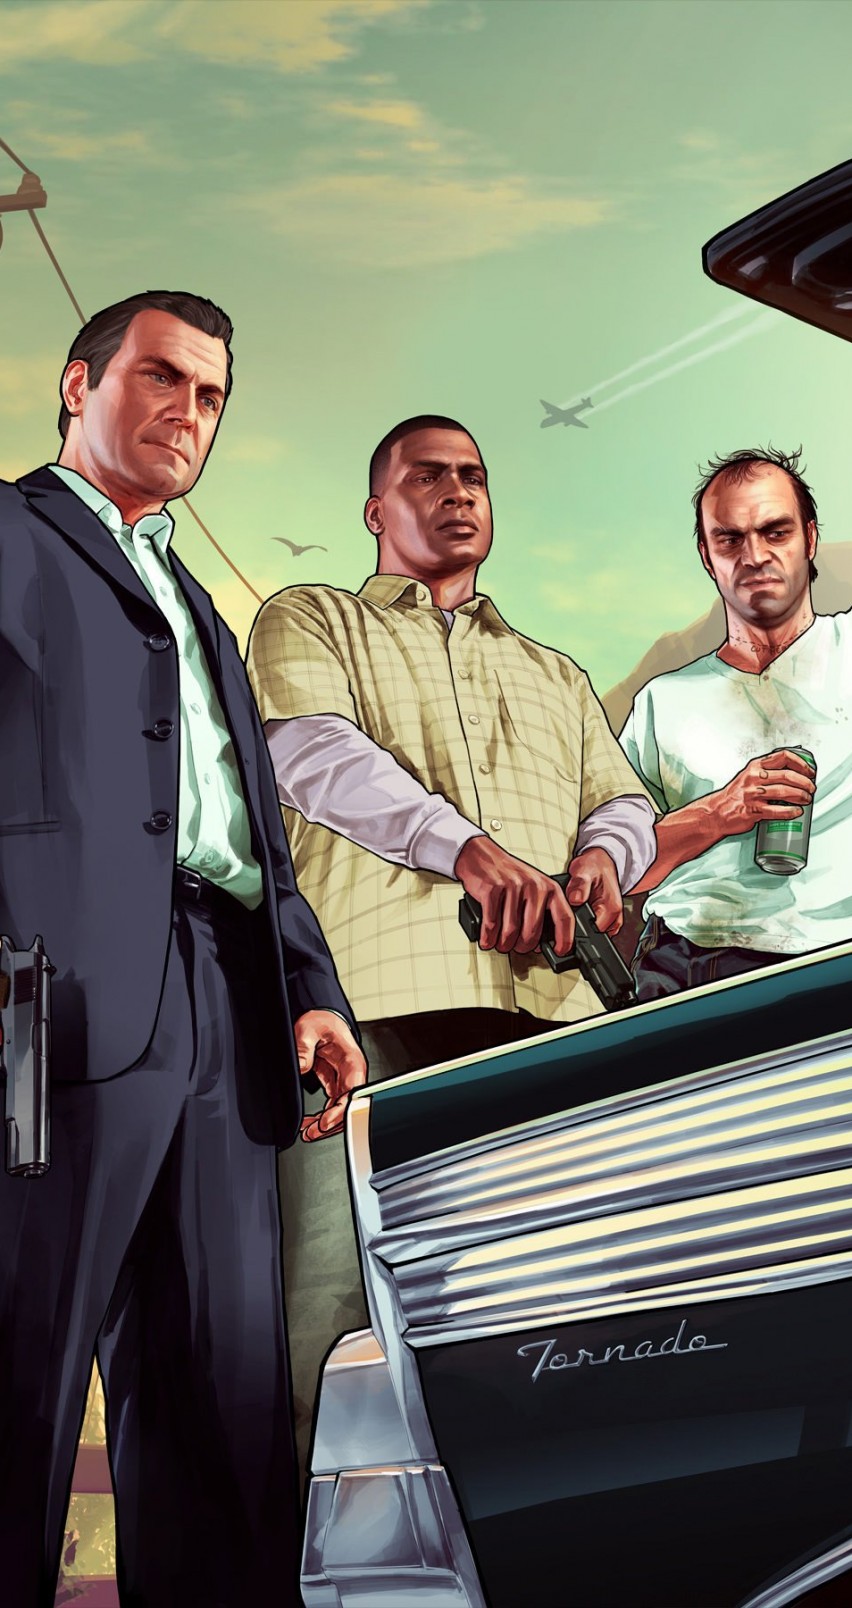 Gta 5 Characters Wallpaper for Apple iPhone 6 / 6s